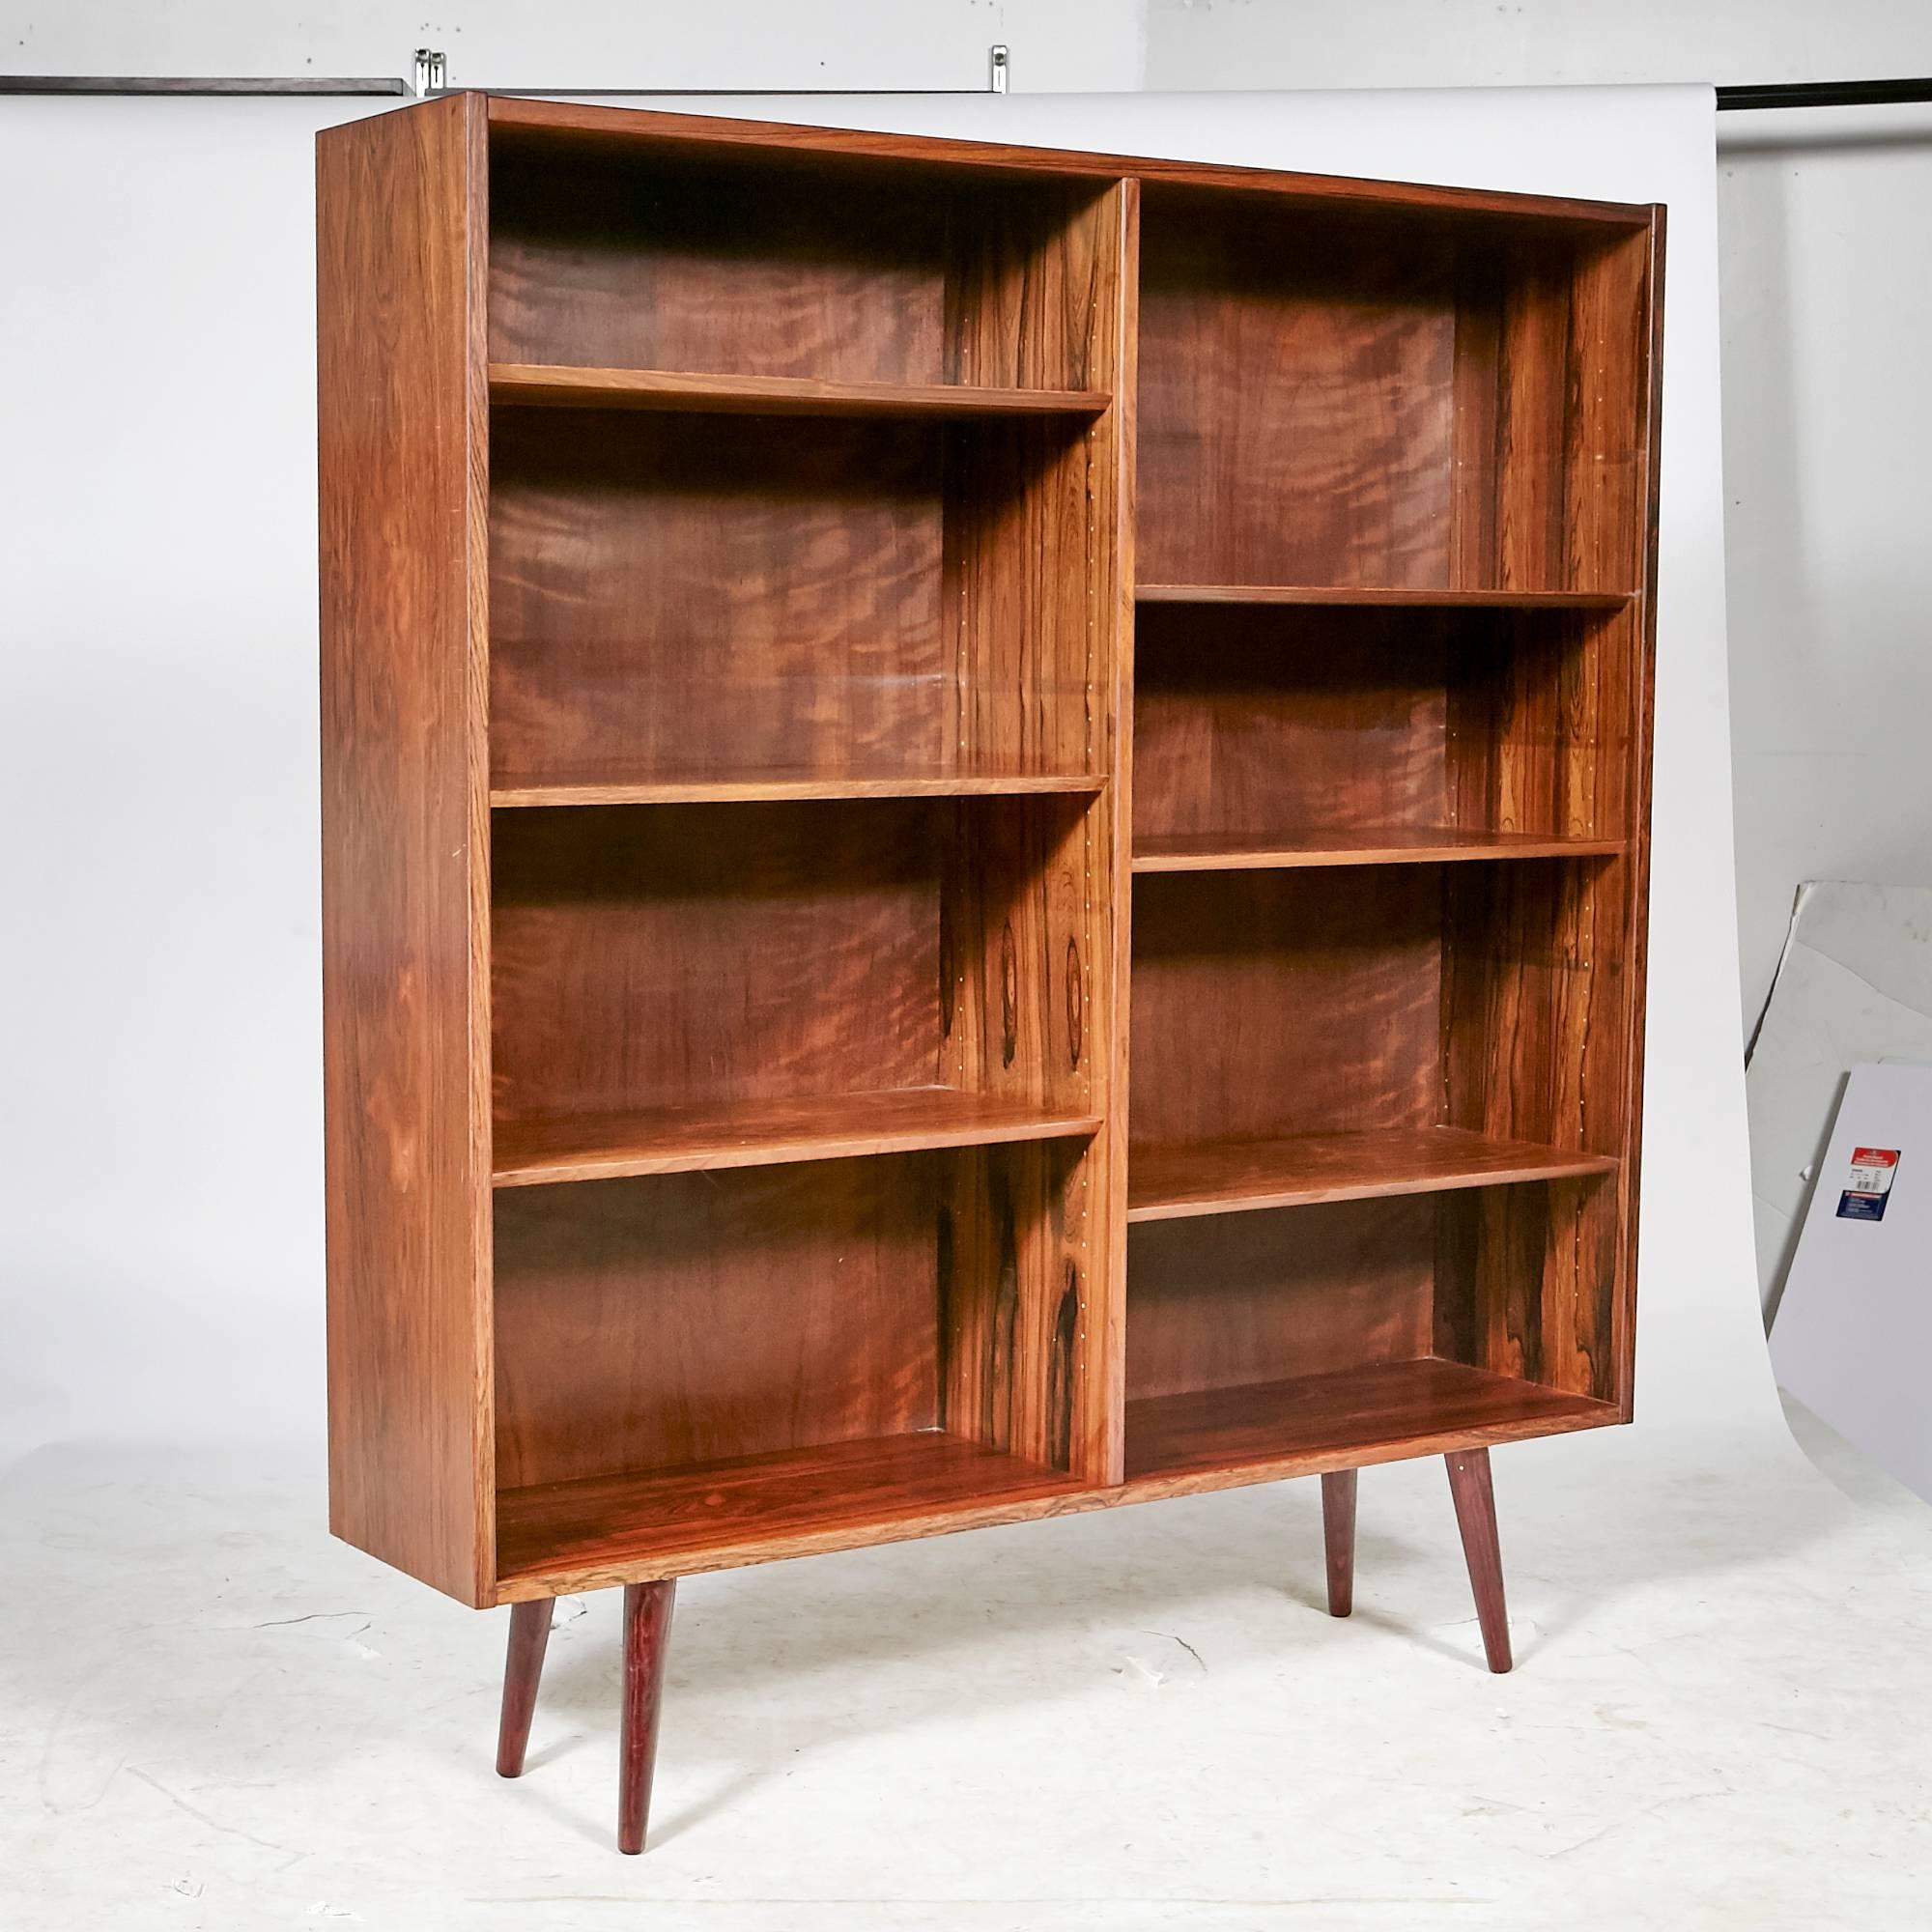 Vintage Scandinavian Modern Danish rosewood bookcase designed by Poul Hundevad, circa 1960s. The shelving is adjustable with round angled legs. Marked.